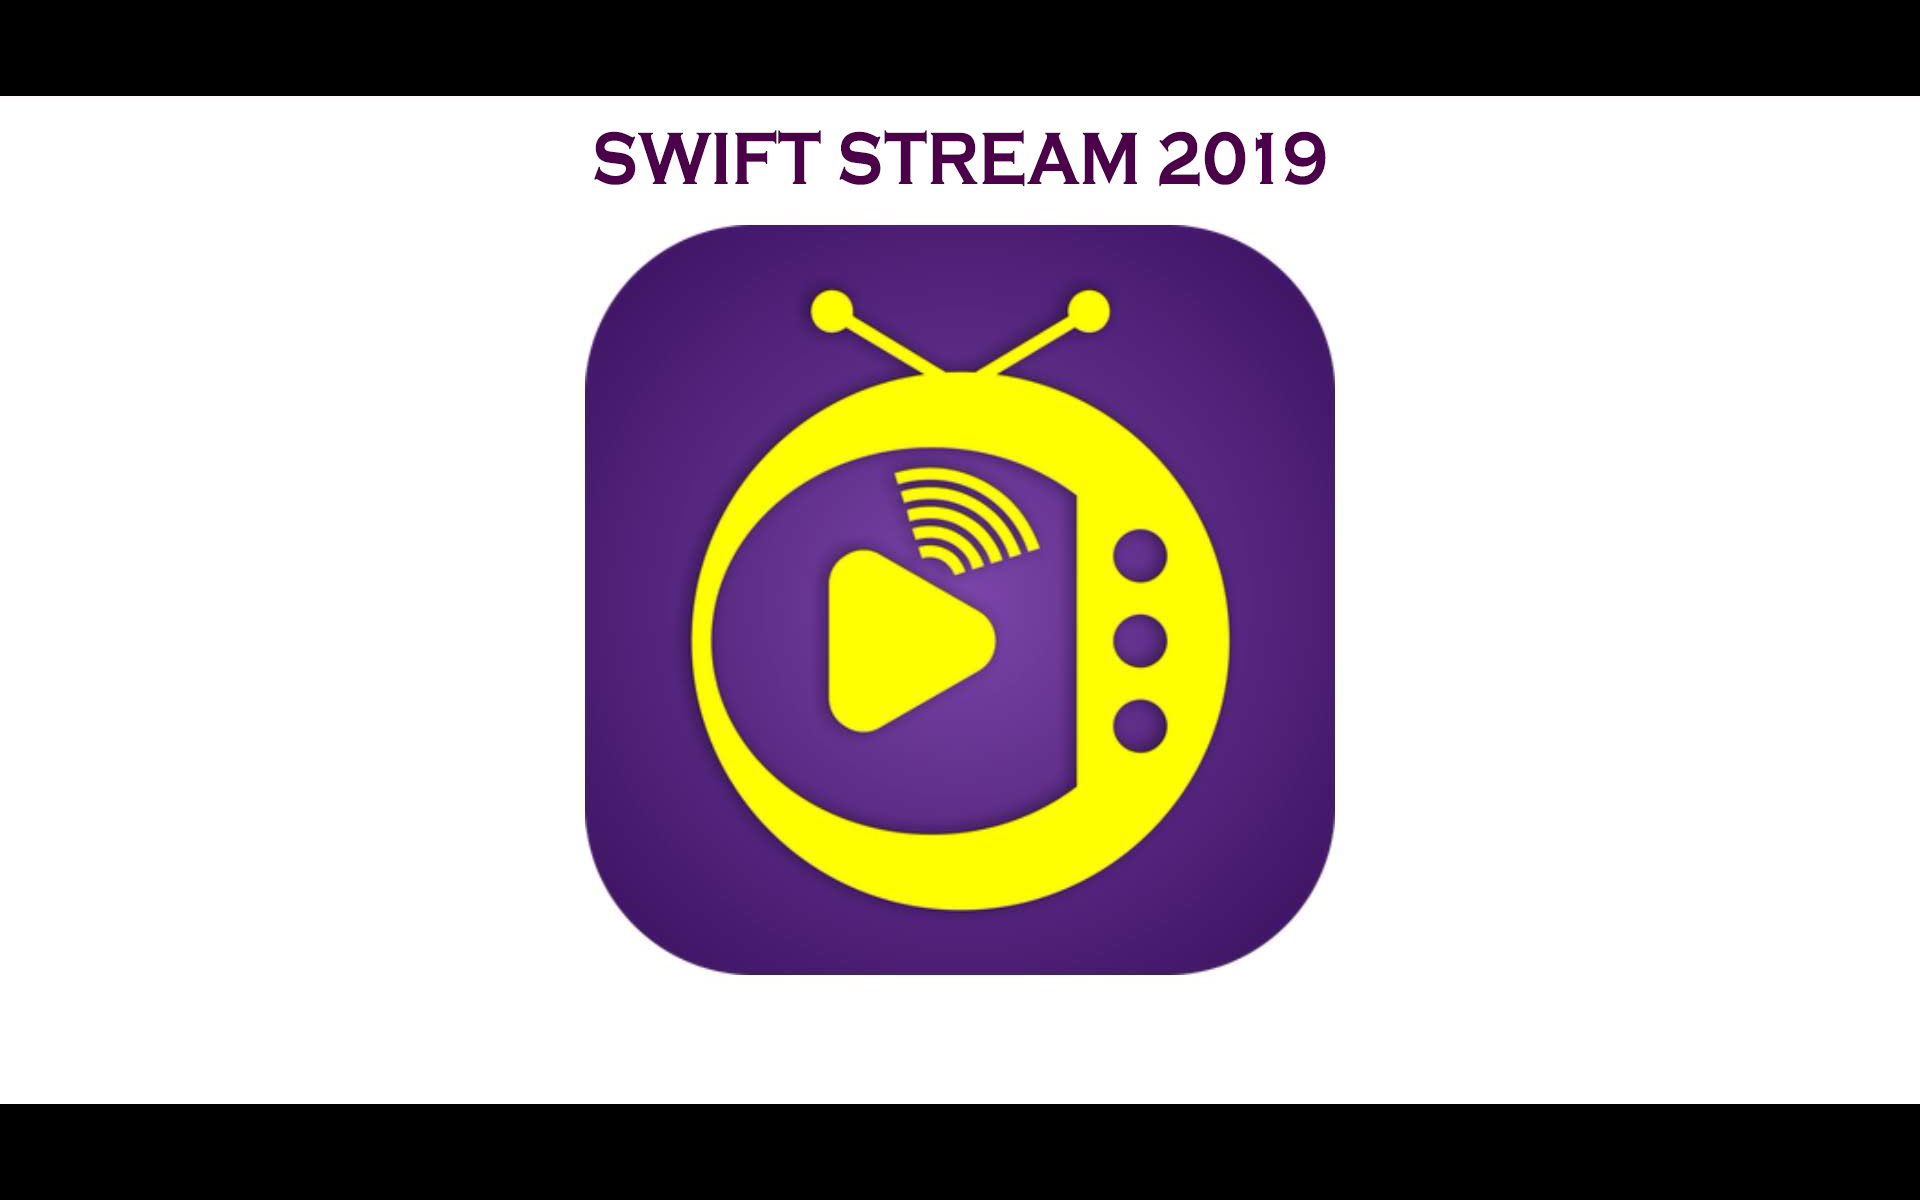 Swift Streamz apk 2019 More than 700+ Live TV Channels